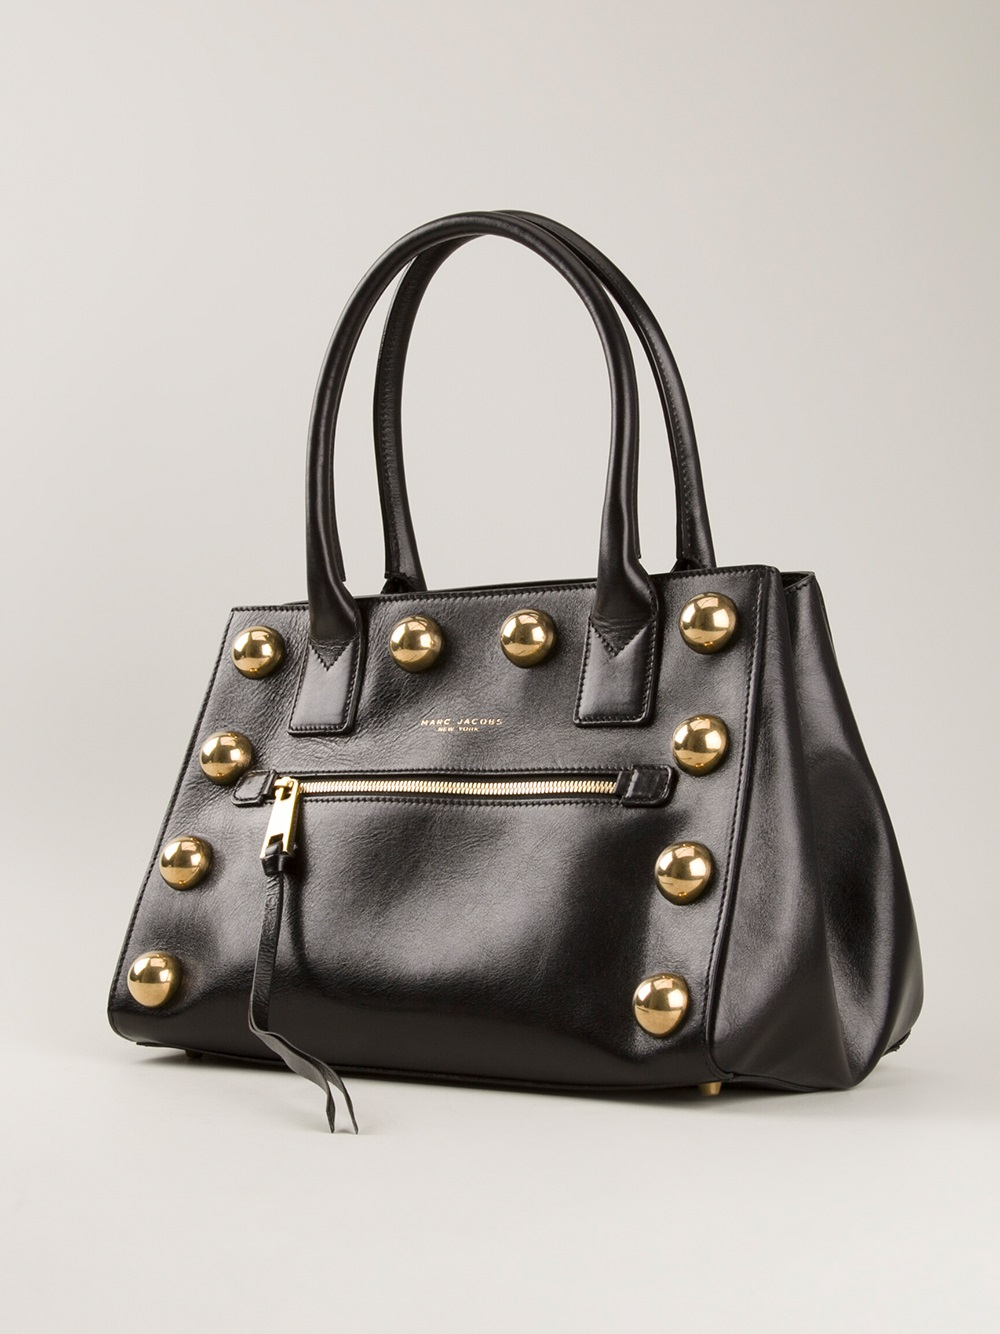 Lyst - Marc Jacobs Studded Tote Bag in Black